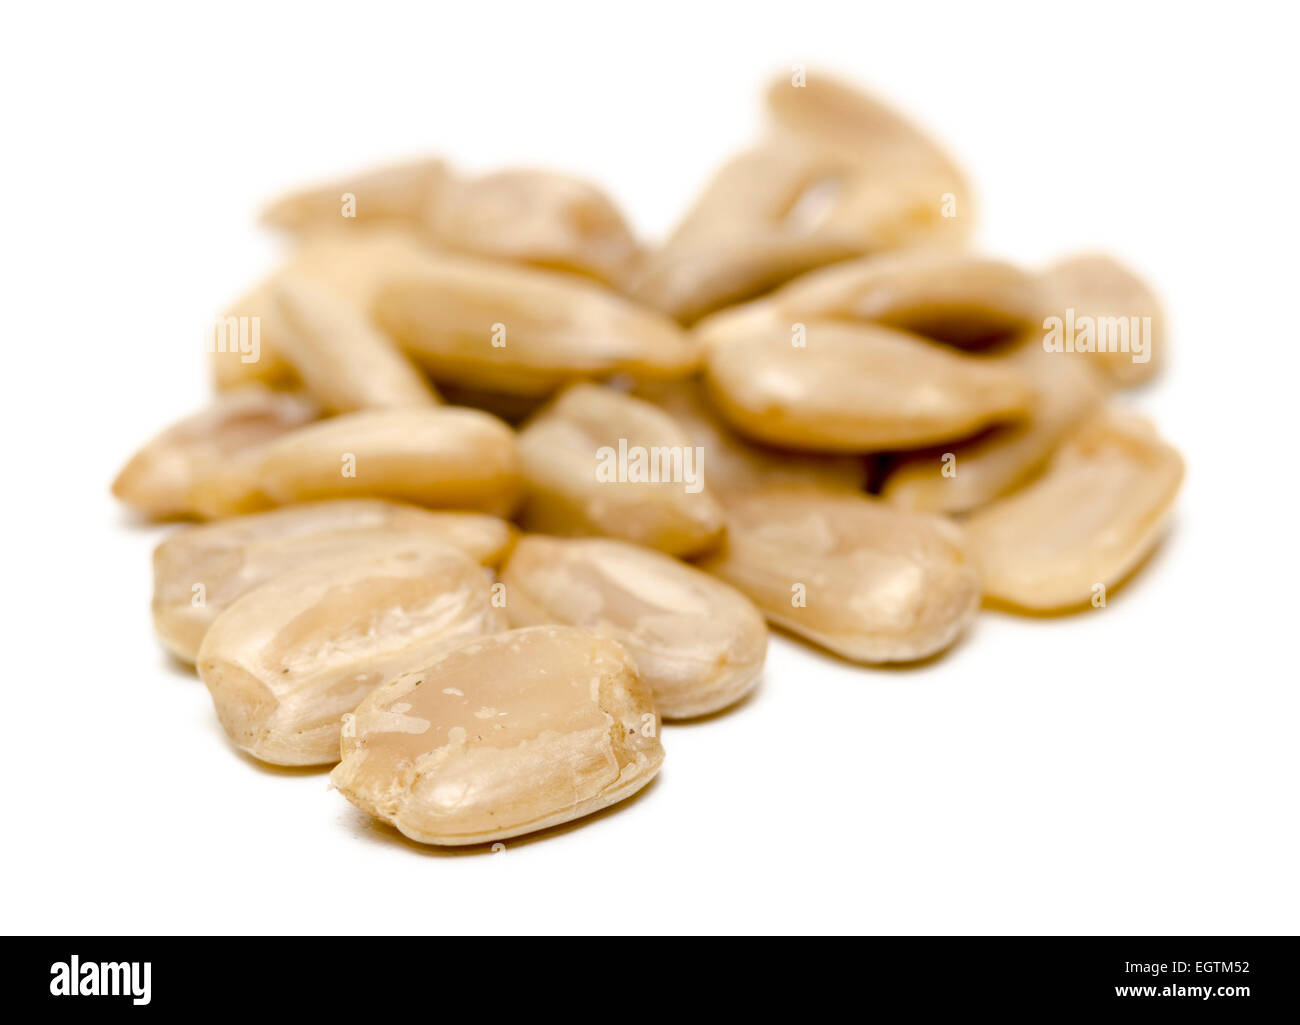 sunflower seeds cut out Stock Photo